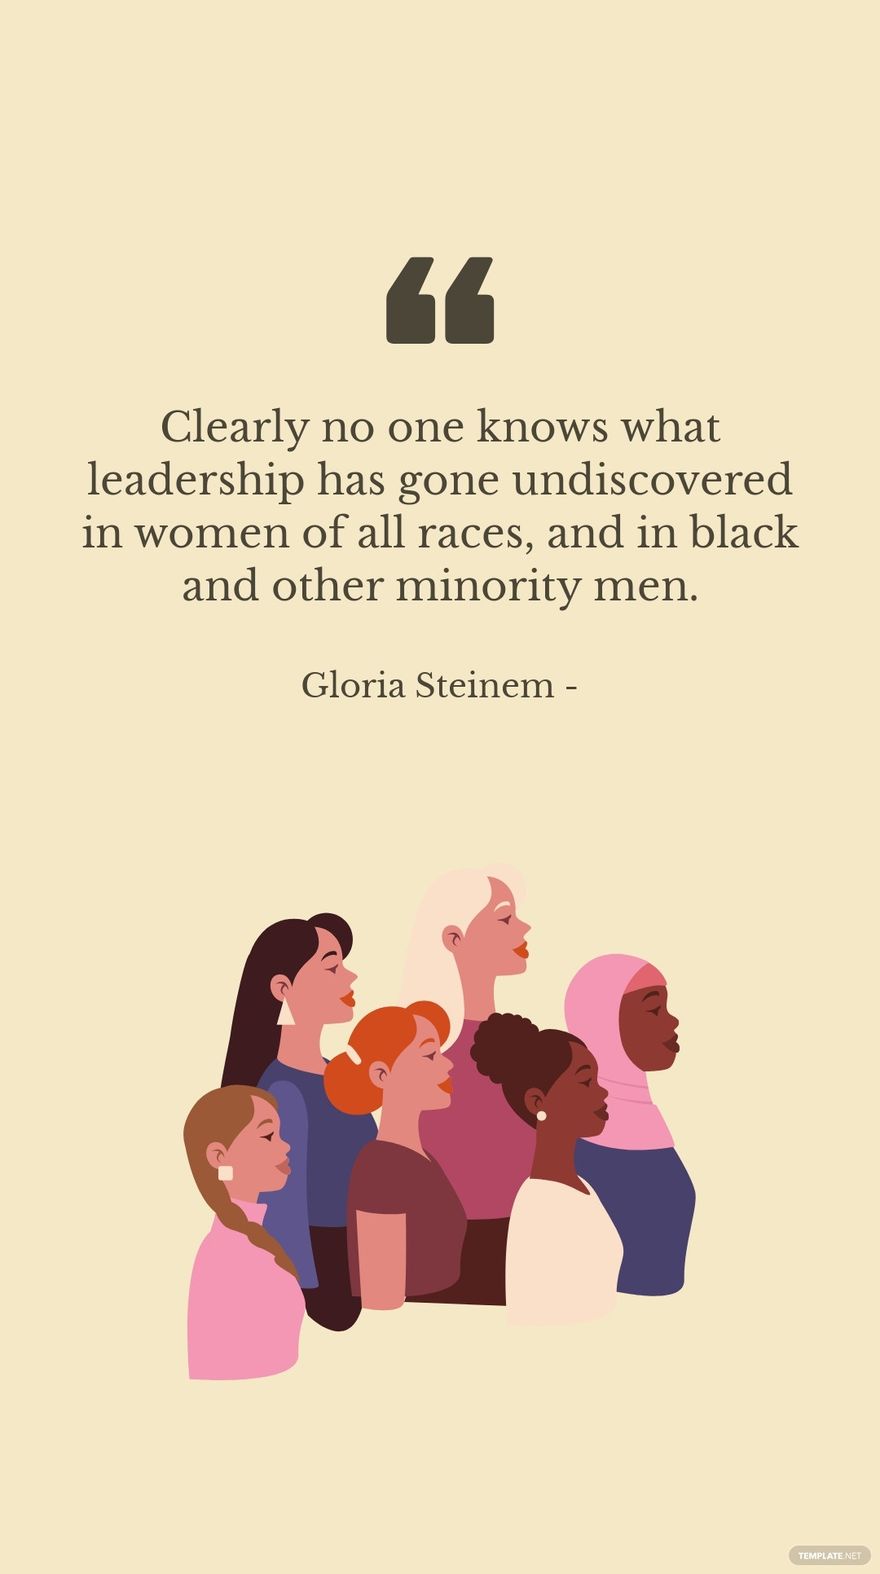 Gloria Steinem - Clearly no one knows what leadership has gone undiscovered in women of all races, and in black and other minority men.